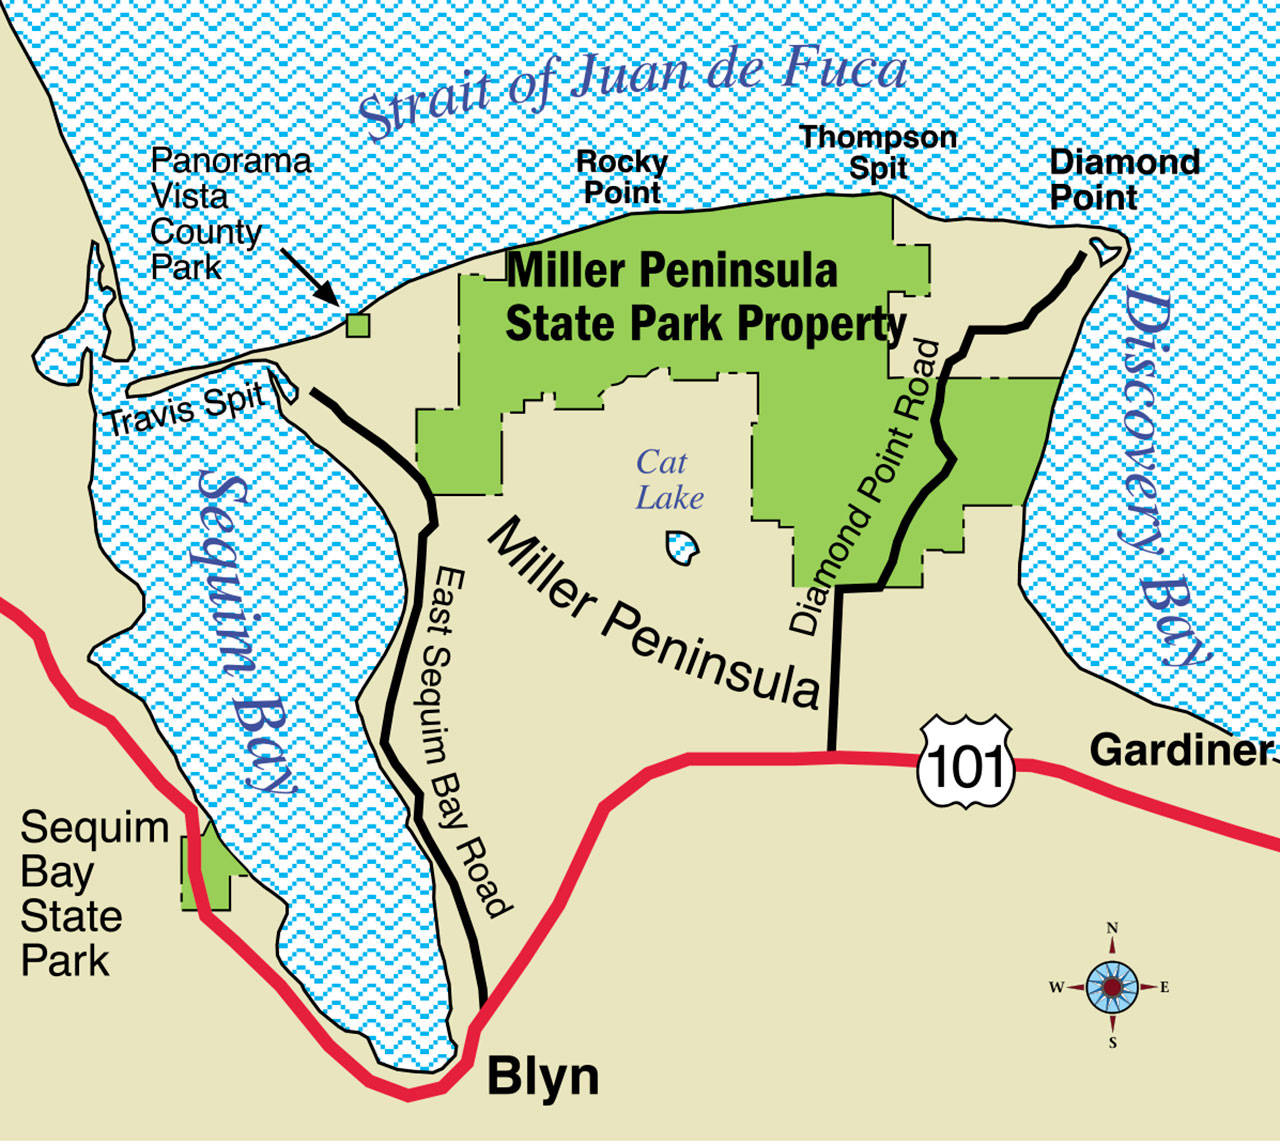 Washington State Parks is looking to create a master plan for the development of Miller Peninsula as the next “destination” state park. (Keith Thorpe/Peninsula Daily News)